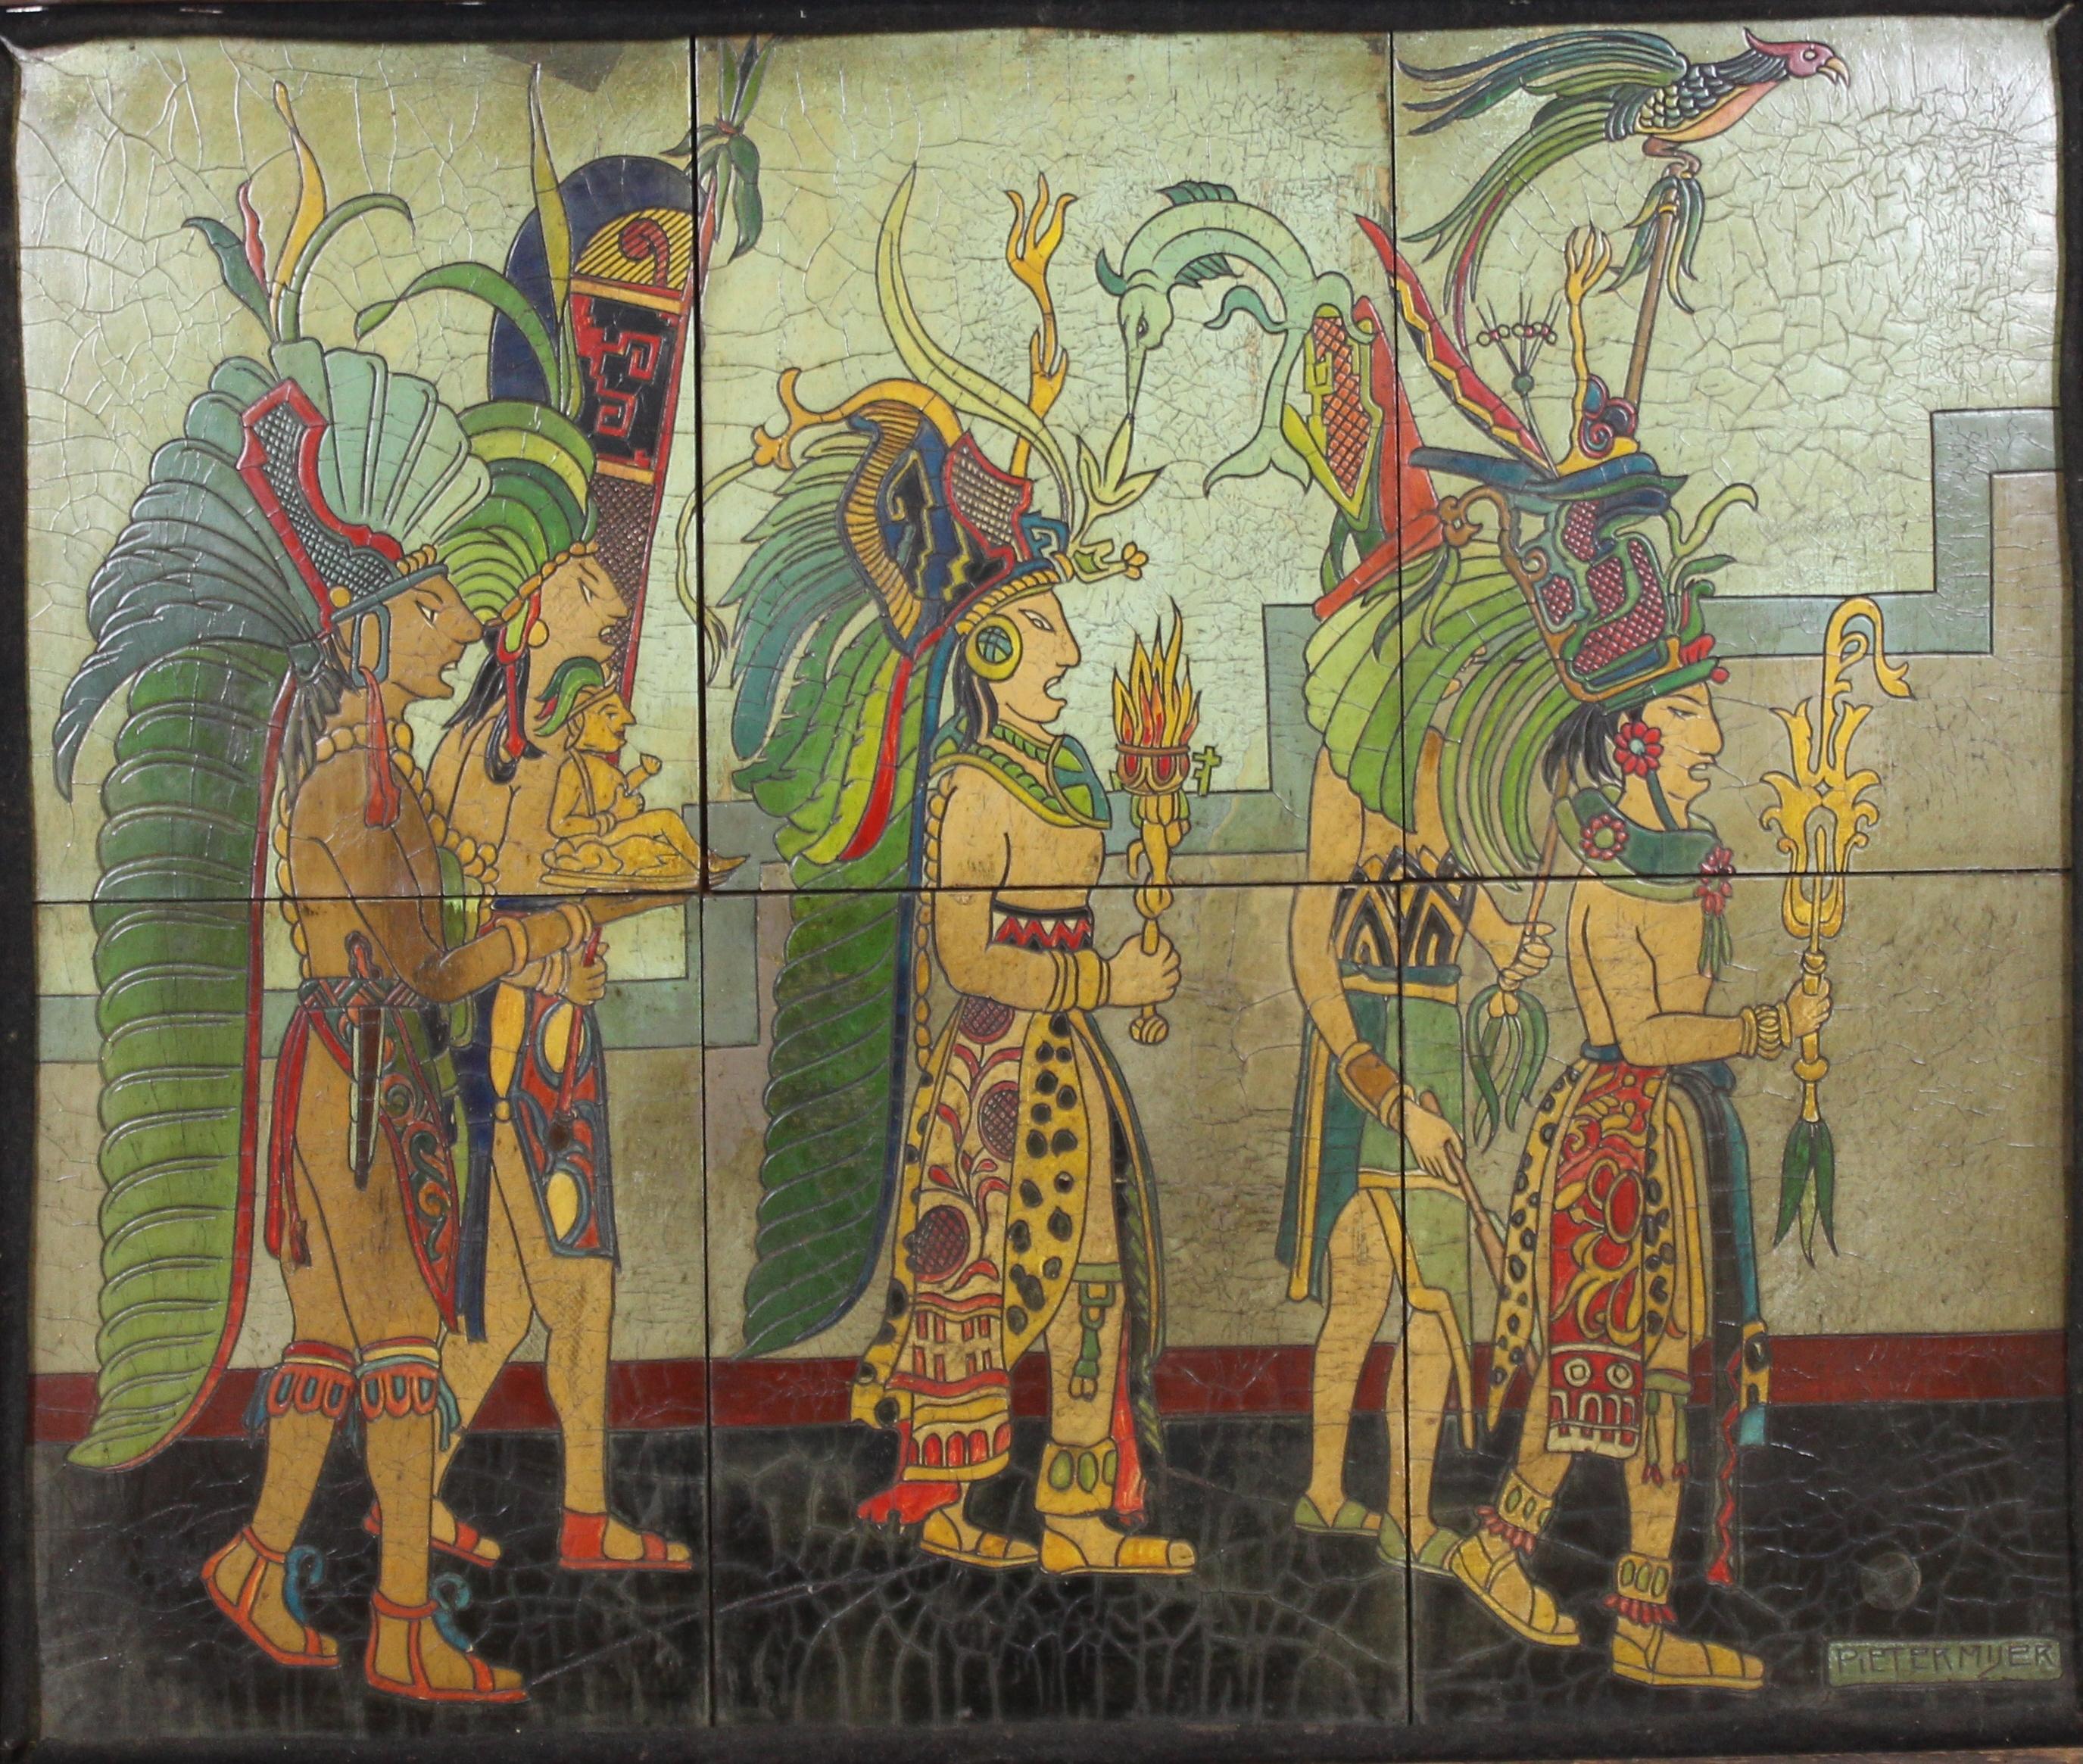 Mexican Art Deco period depiction of a Mayan procession, created in lacquered and carved wooden panels, assembled and framed in original wooden frame. The piece was made by Pieter Mijer and is signed in the lower right corner. The piece depicts a